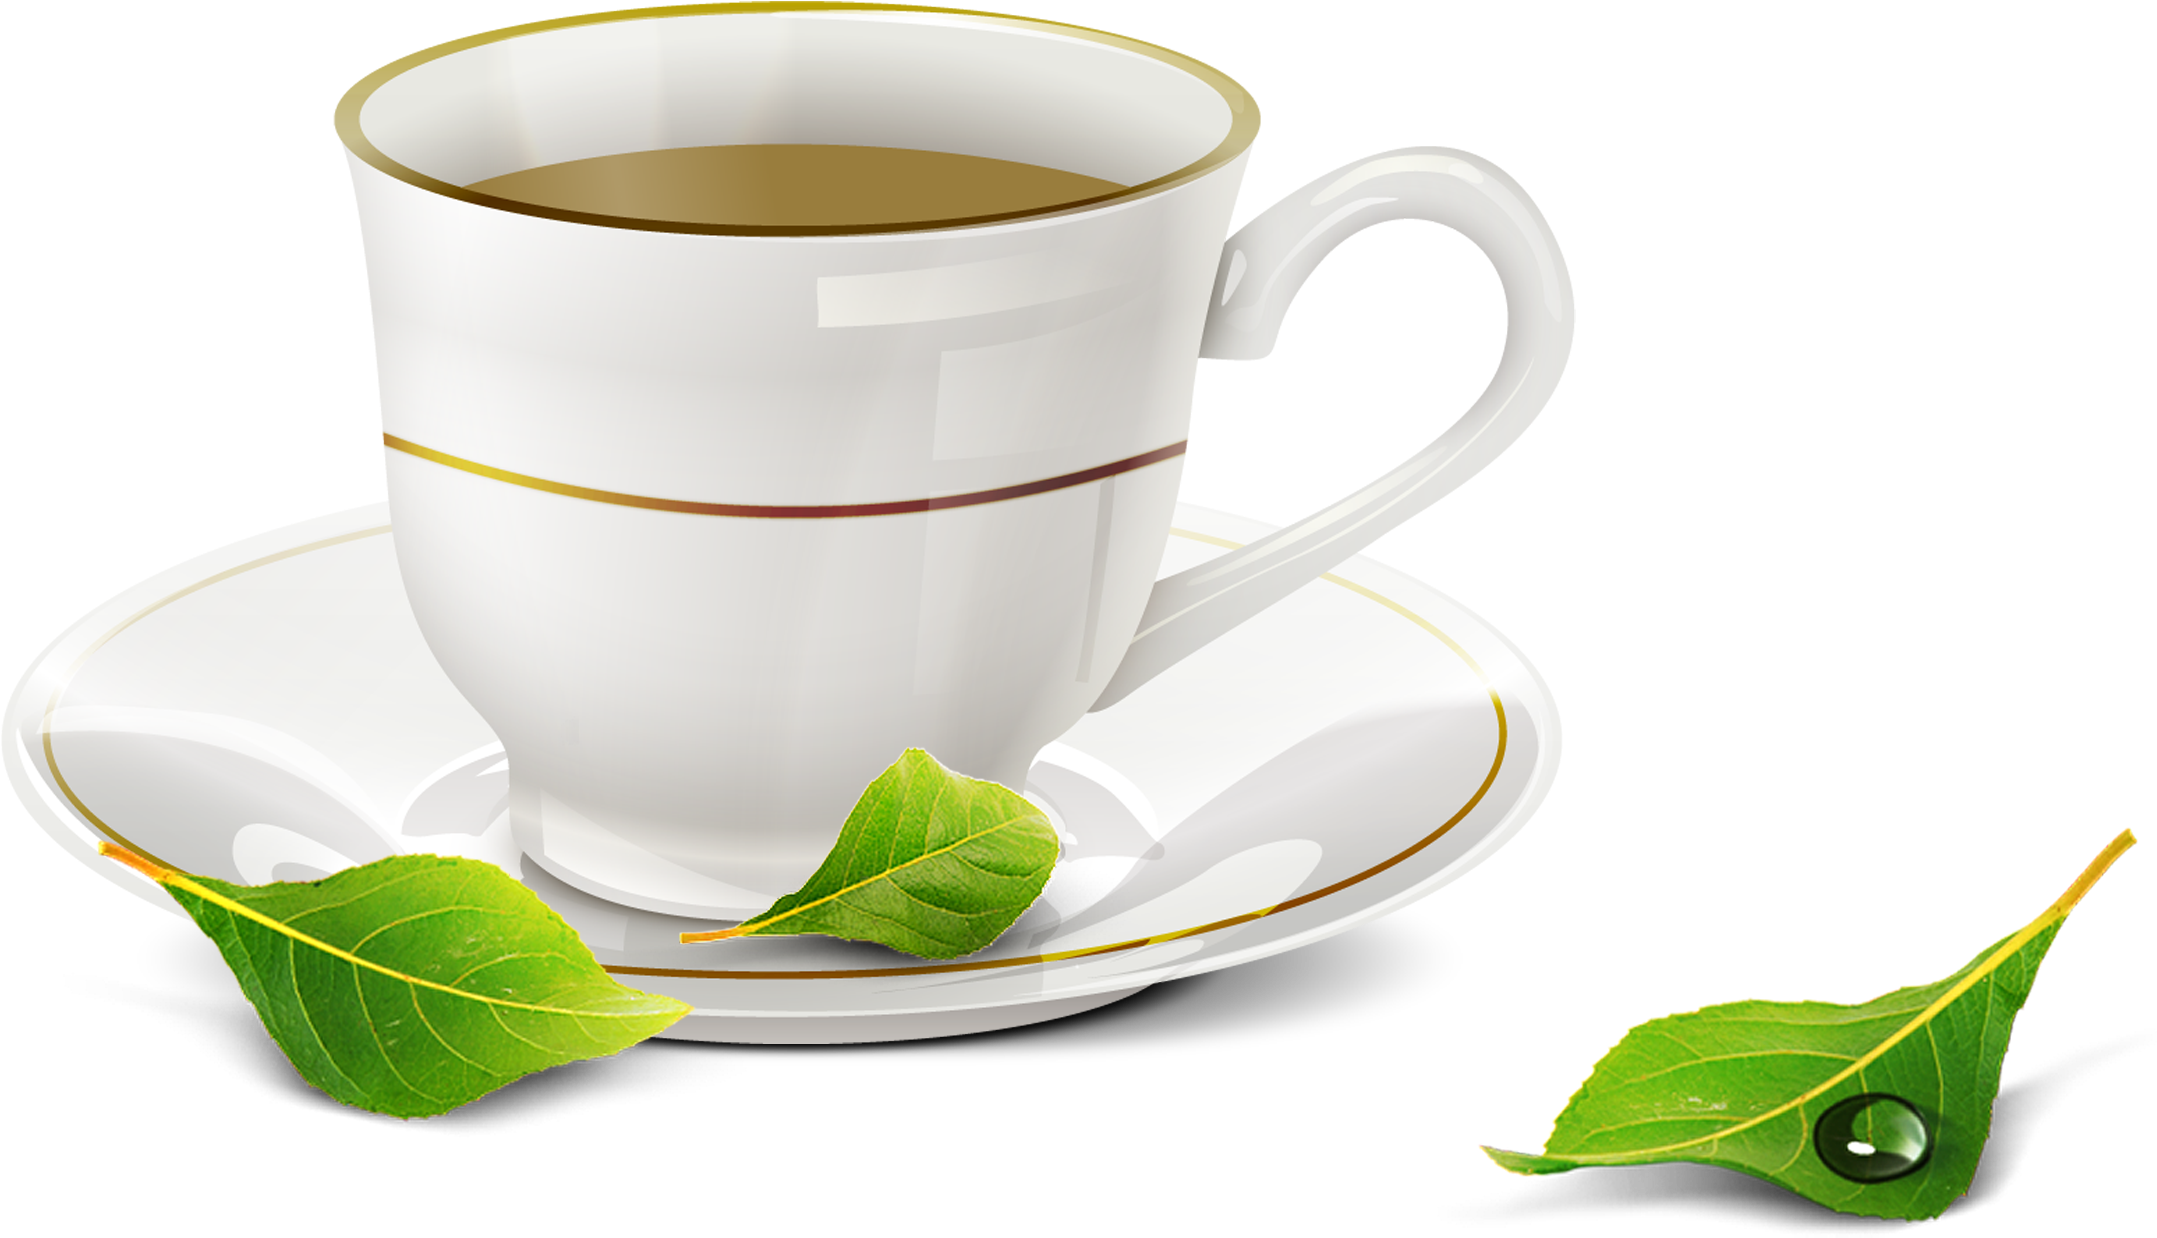 A Cup Of Tea With Leaves